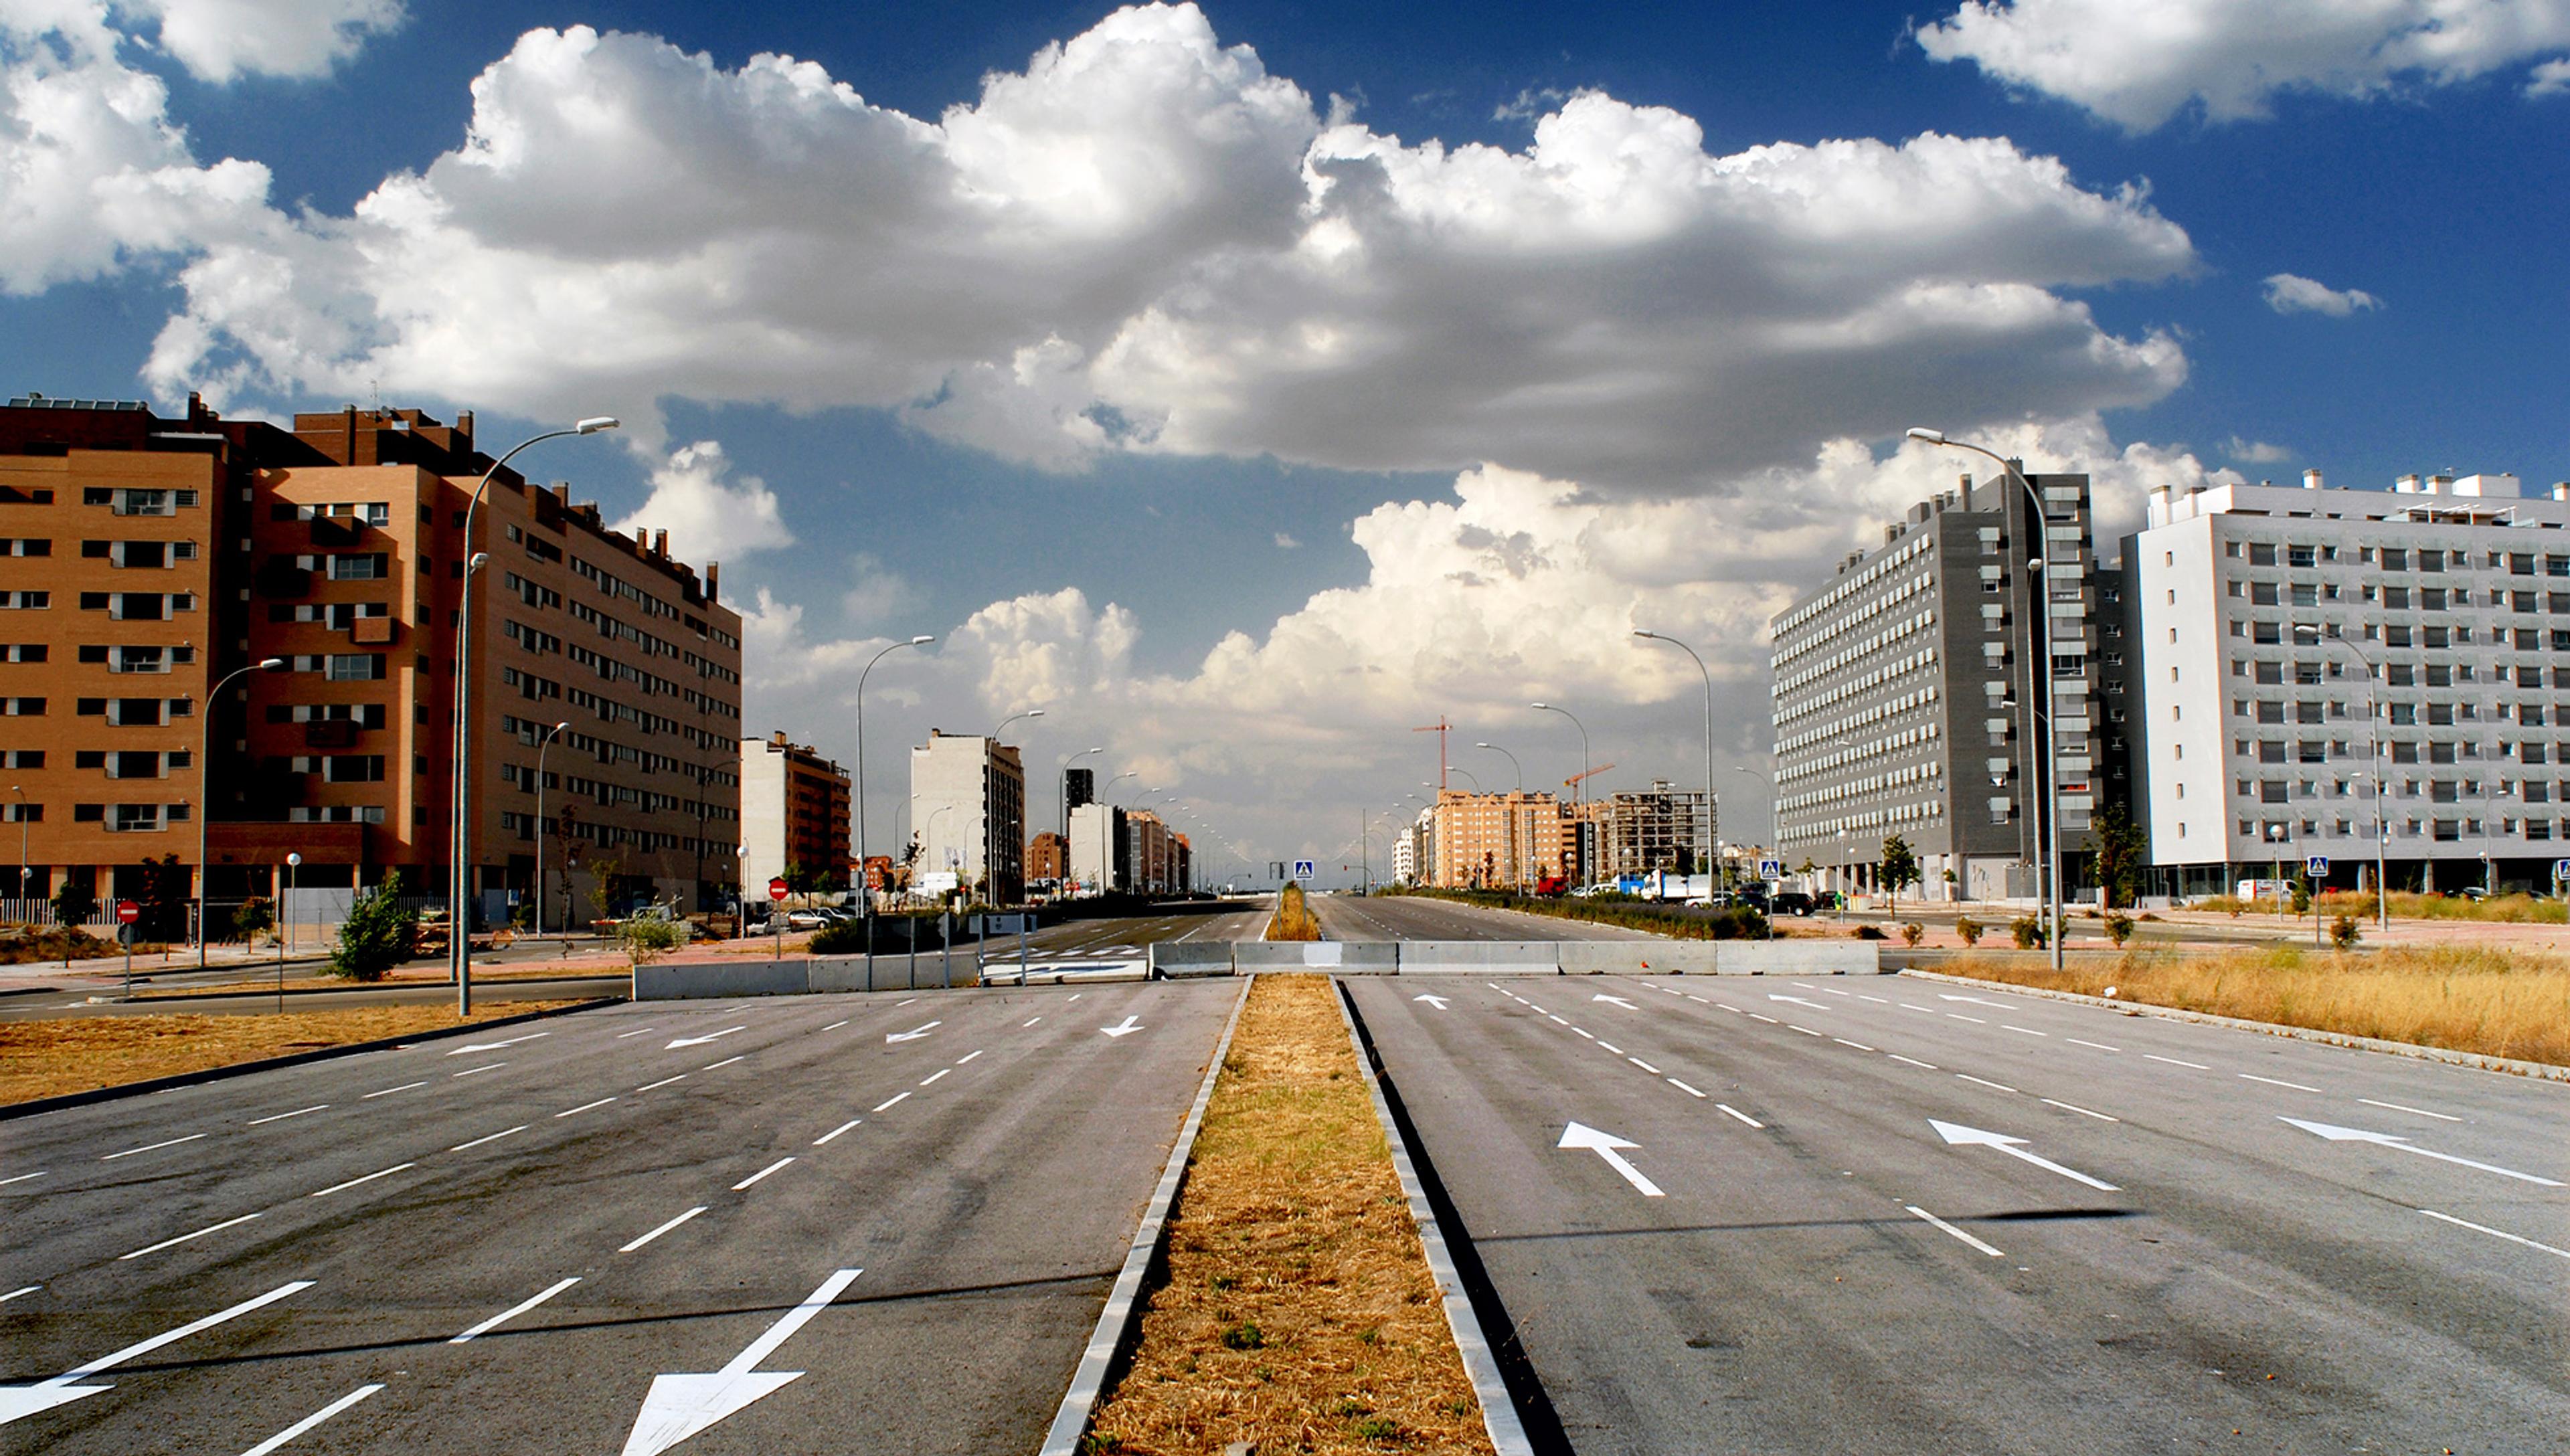 Wide, empty urban road flanked by modern apartment buildings under a partly cloudy sky.